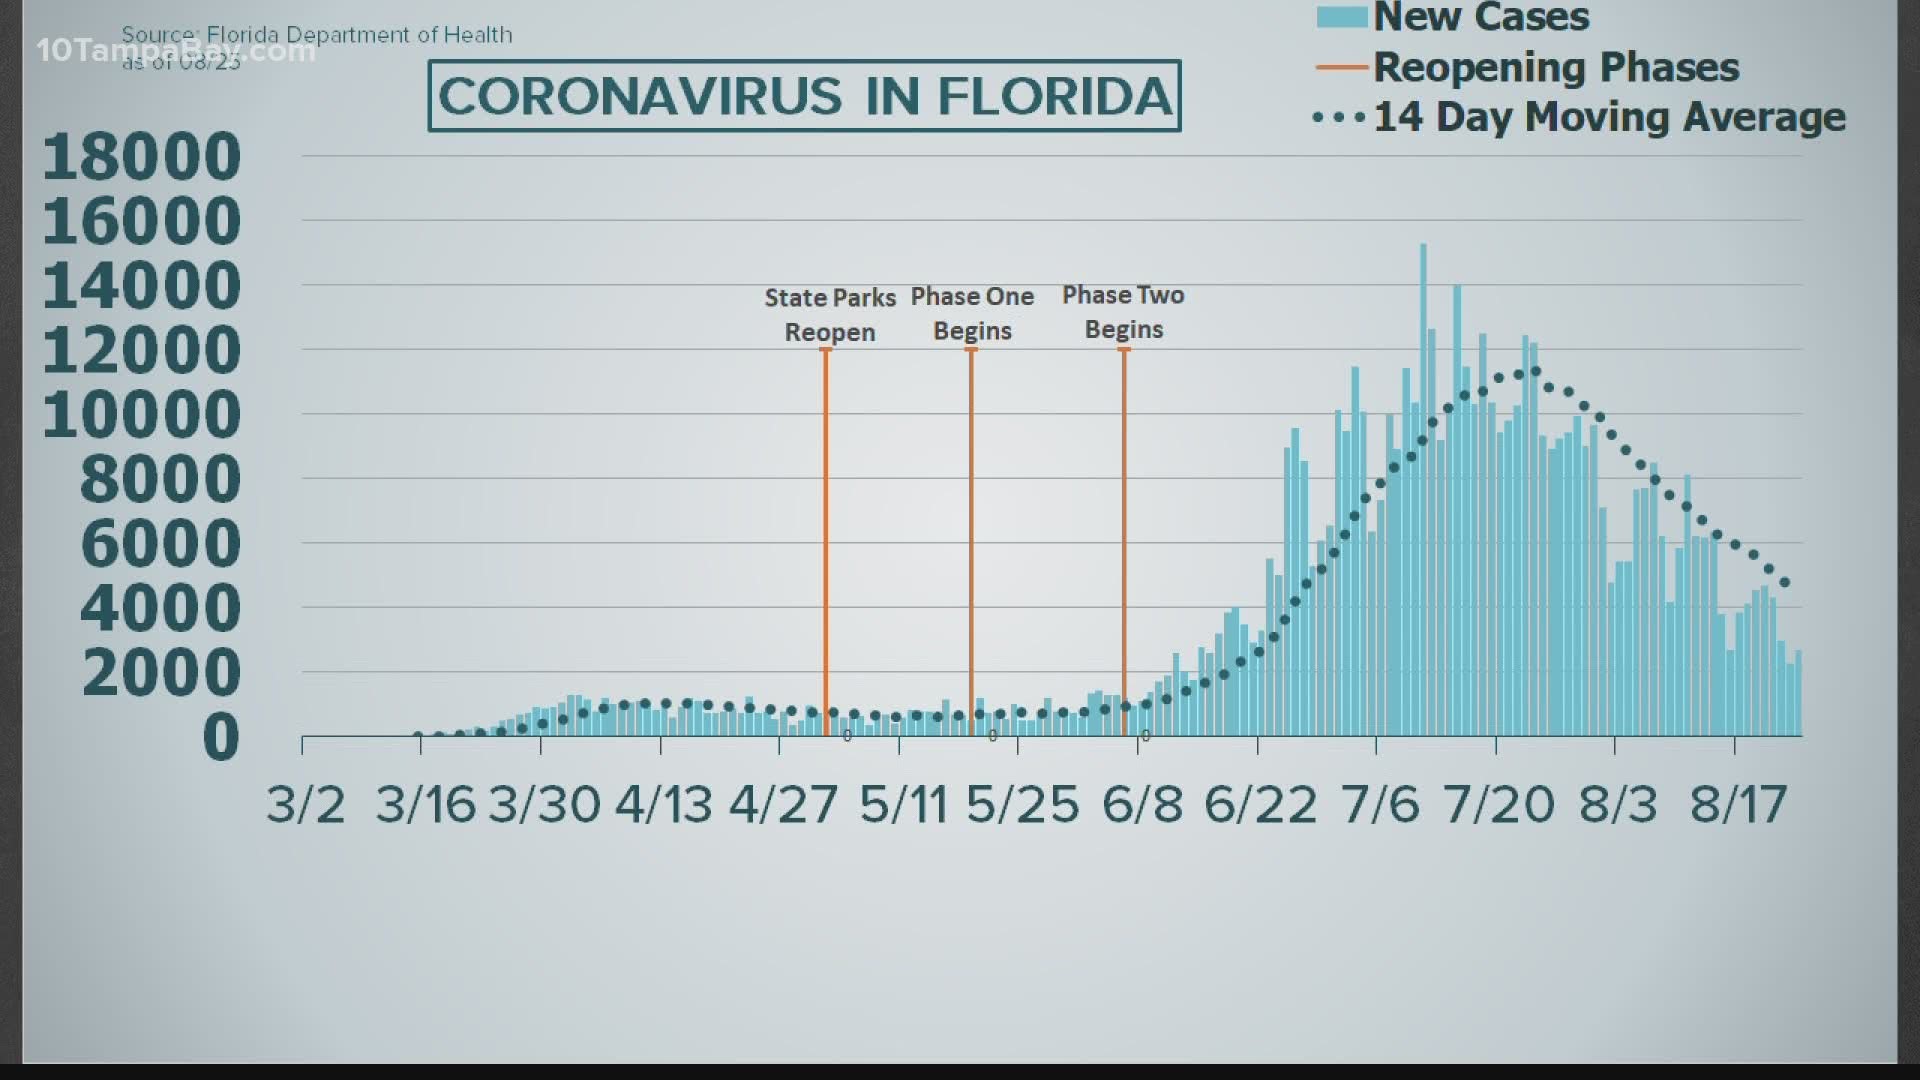 Out of more than 43,000 tests results turned in, 7.49 percent were positive for coronavirus.